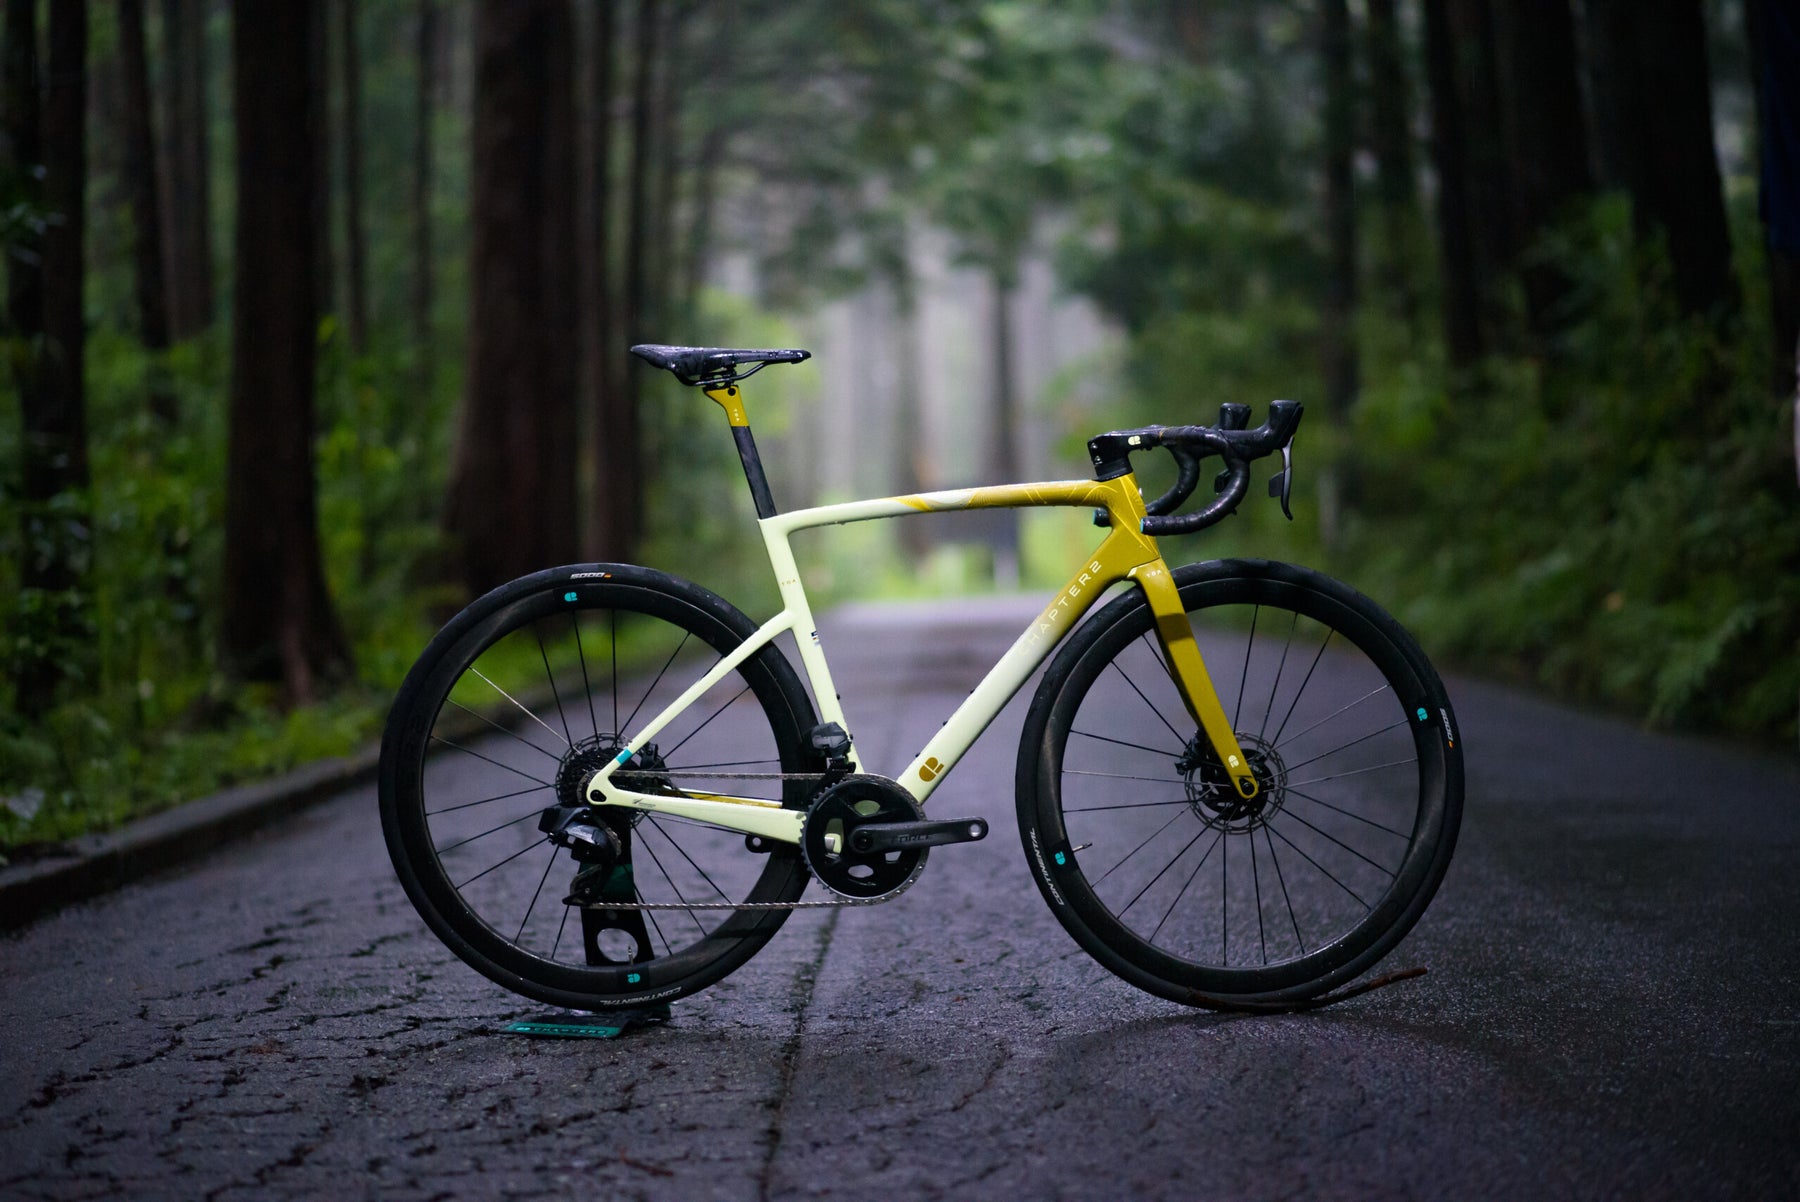 2022/23 BIKE OF THE YEAR (from Bicycling Australia Magazine)